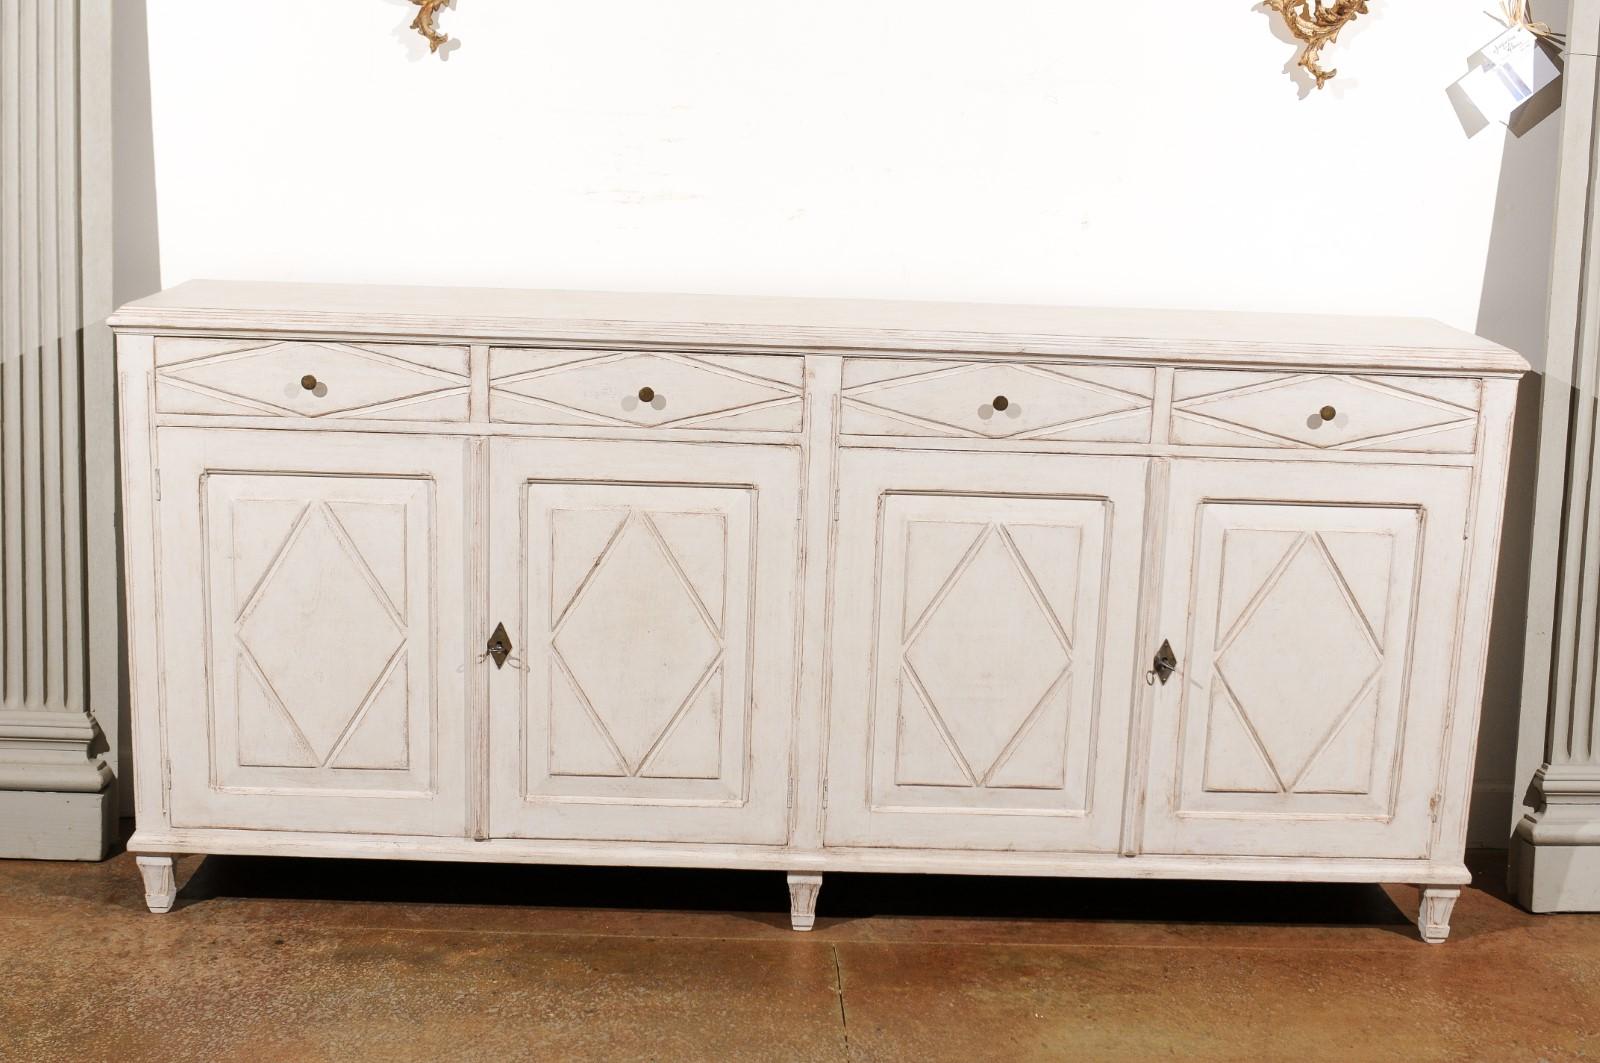 A Swedish Gustavian style painted sideboard from the late 19th century, with four drawers over four doors and diamond motifs. Born in Sweden during the later years of the 19th century, this Swedish enfilade features a rectangular top with molded